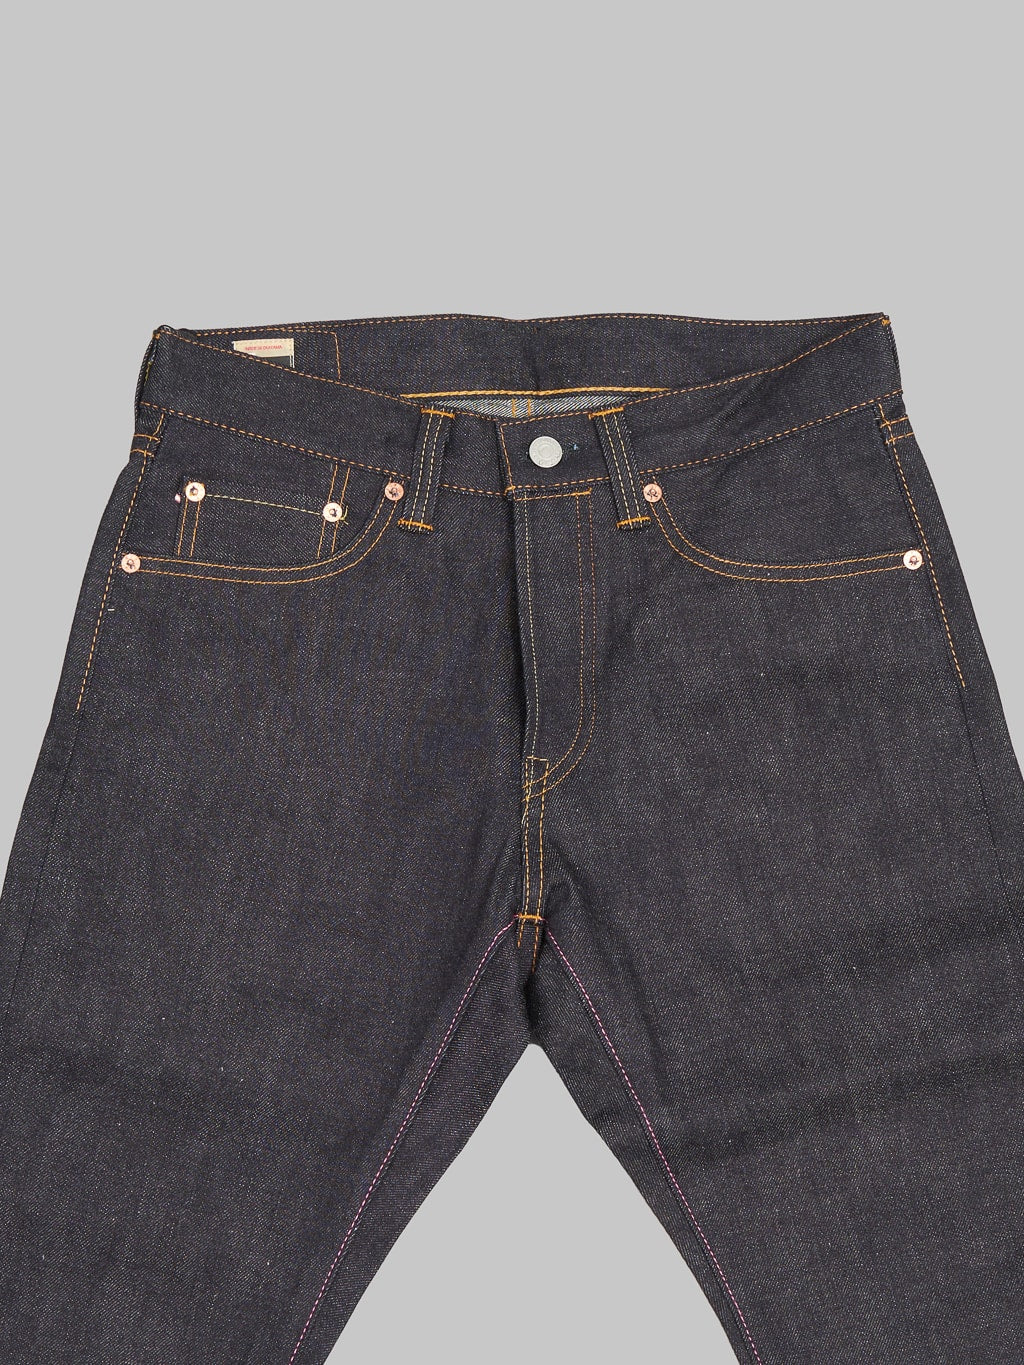 Momotaro 0405 12 going to batle 12oz high Tapered Jeans waist